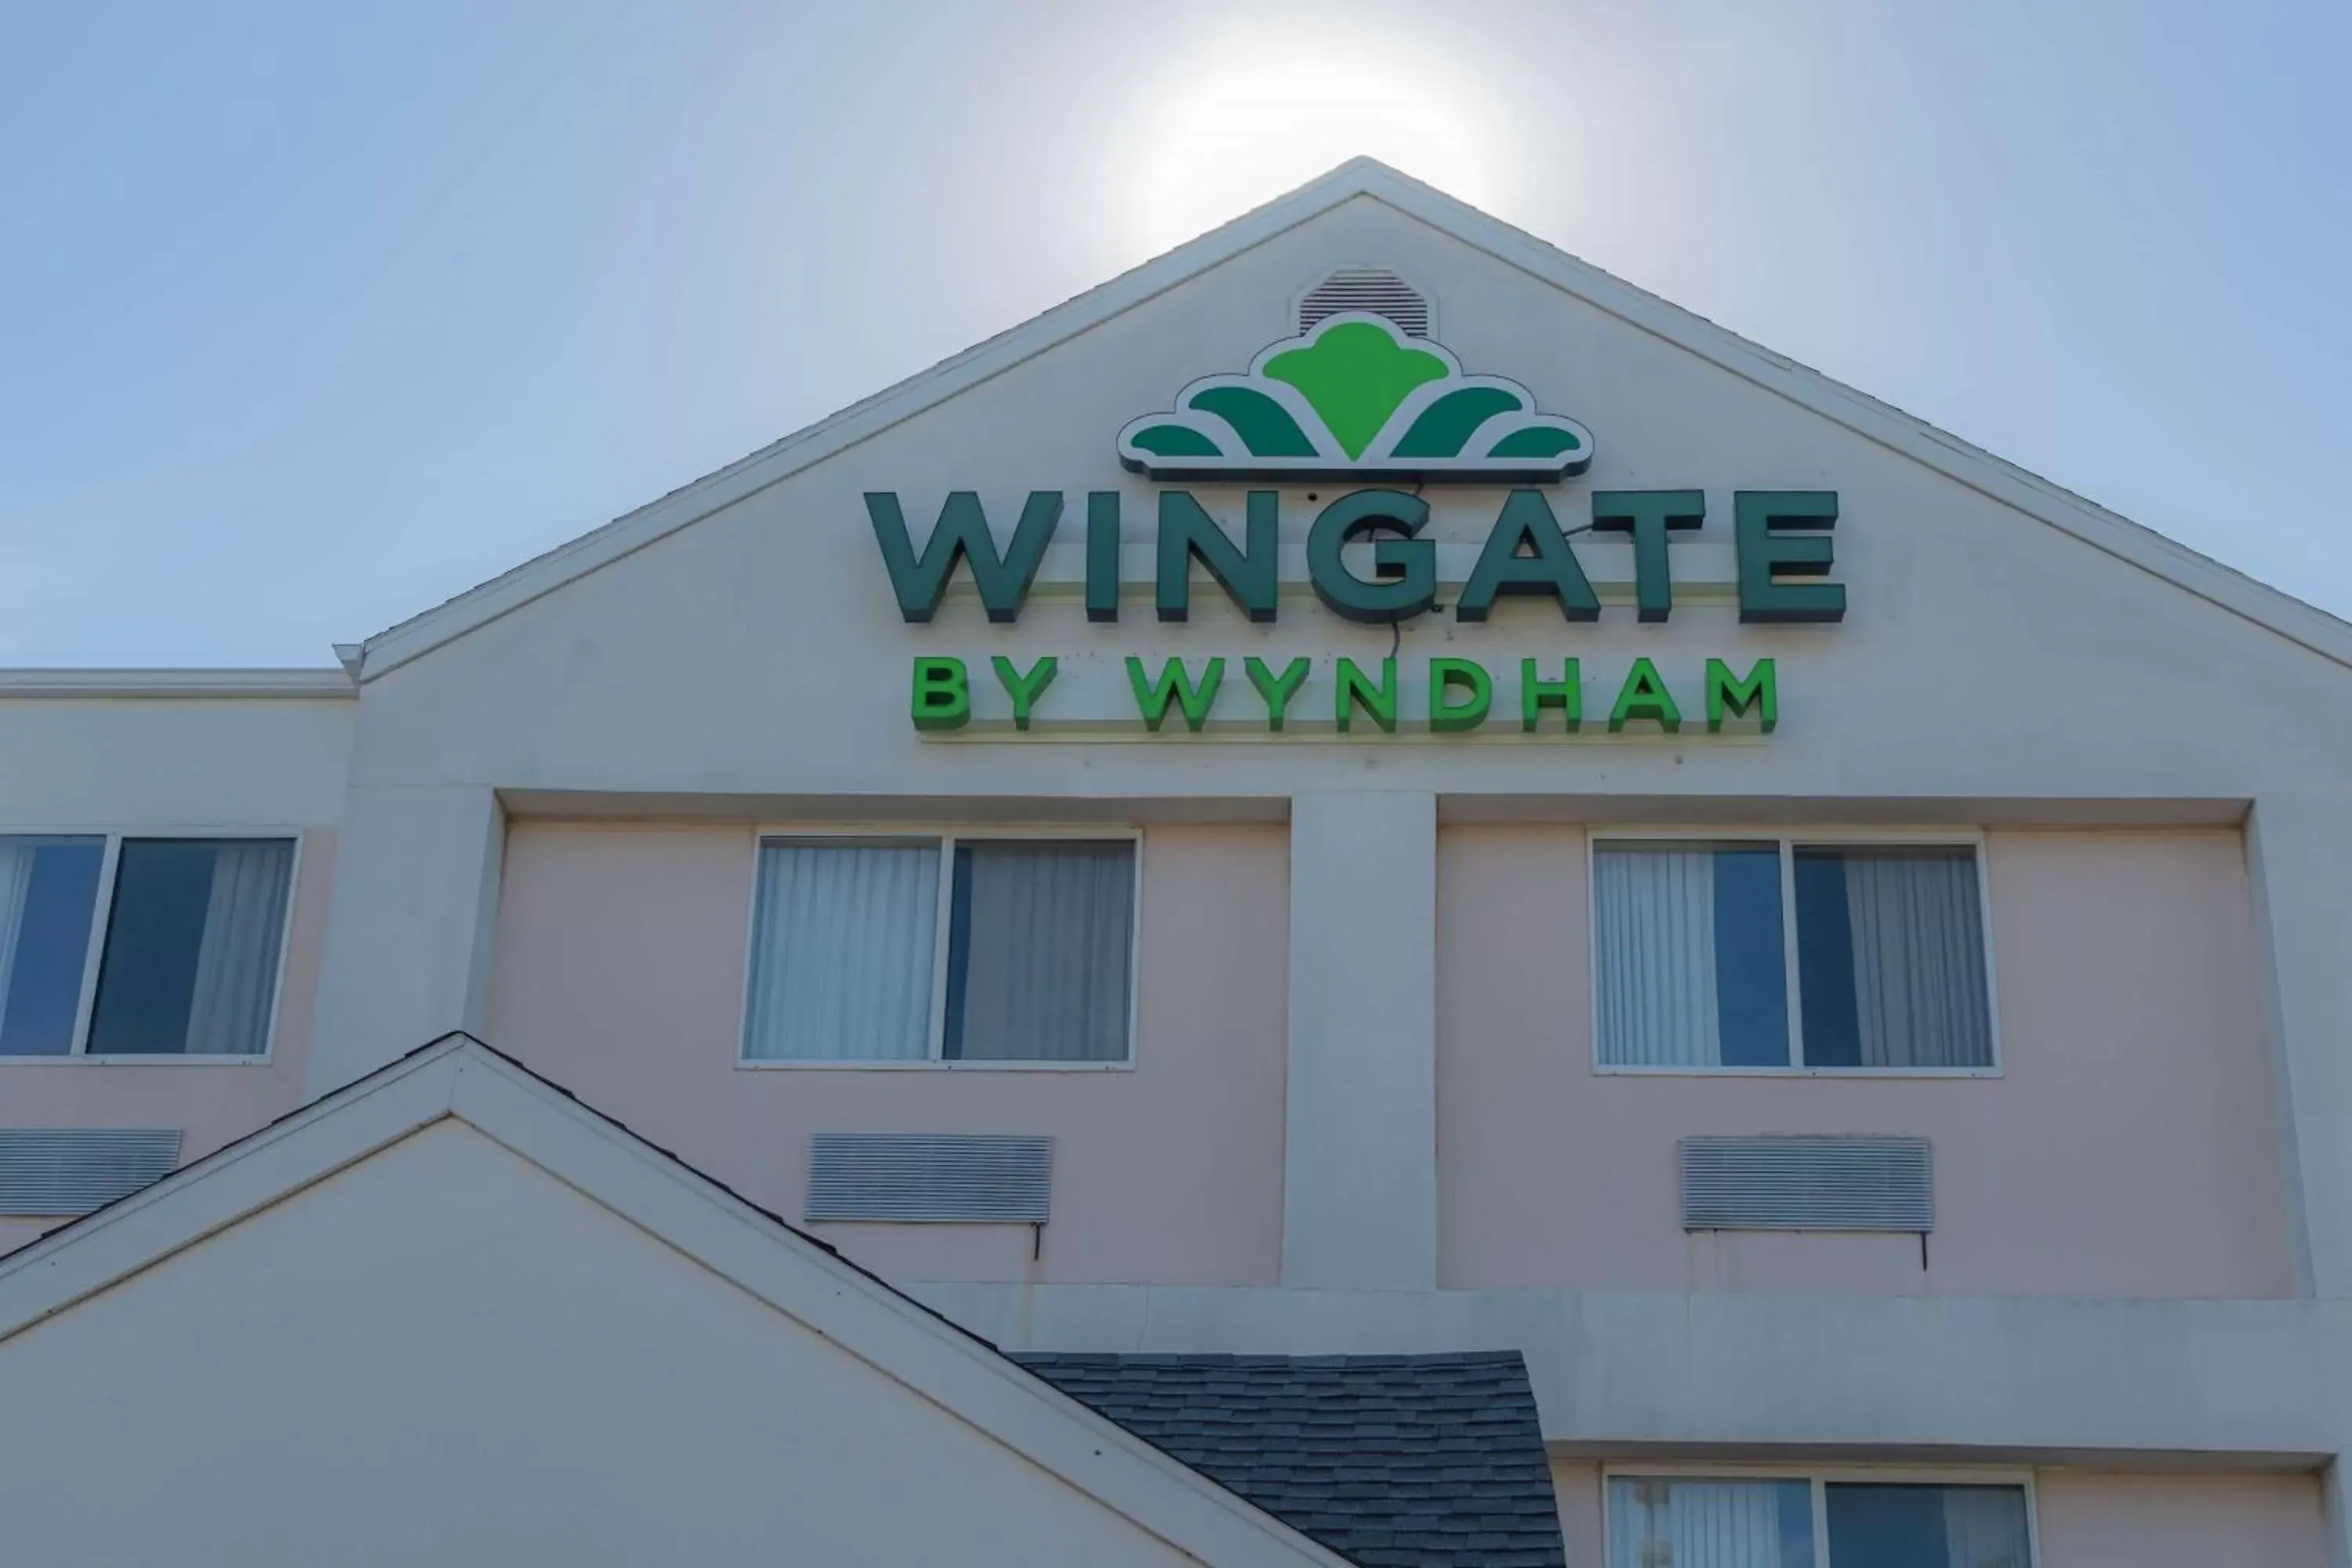 Property Building in Wingate by Wyndham Sioux City